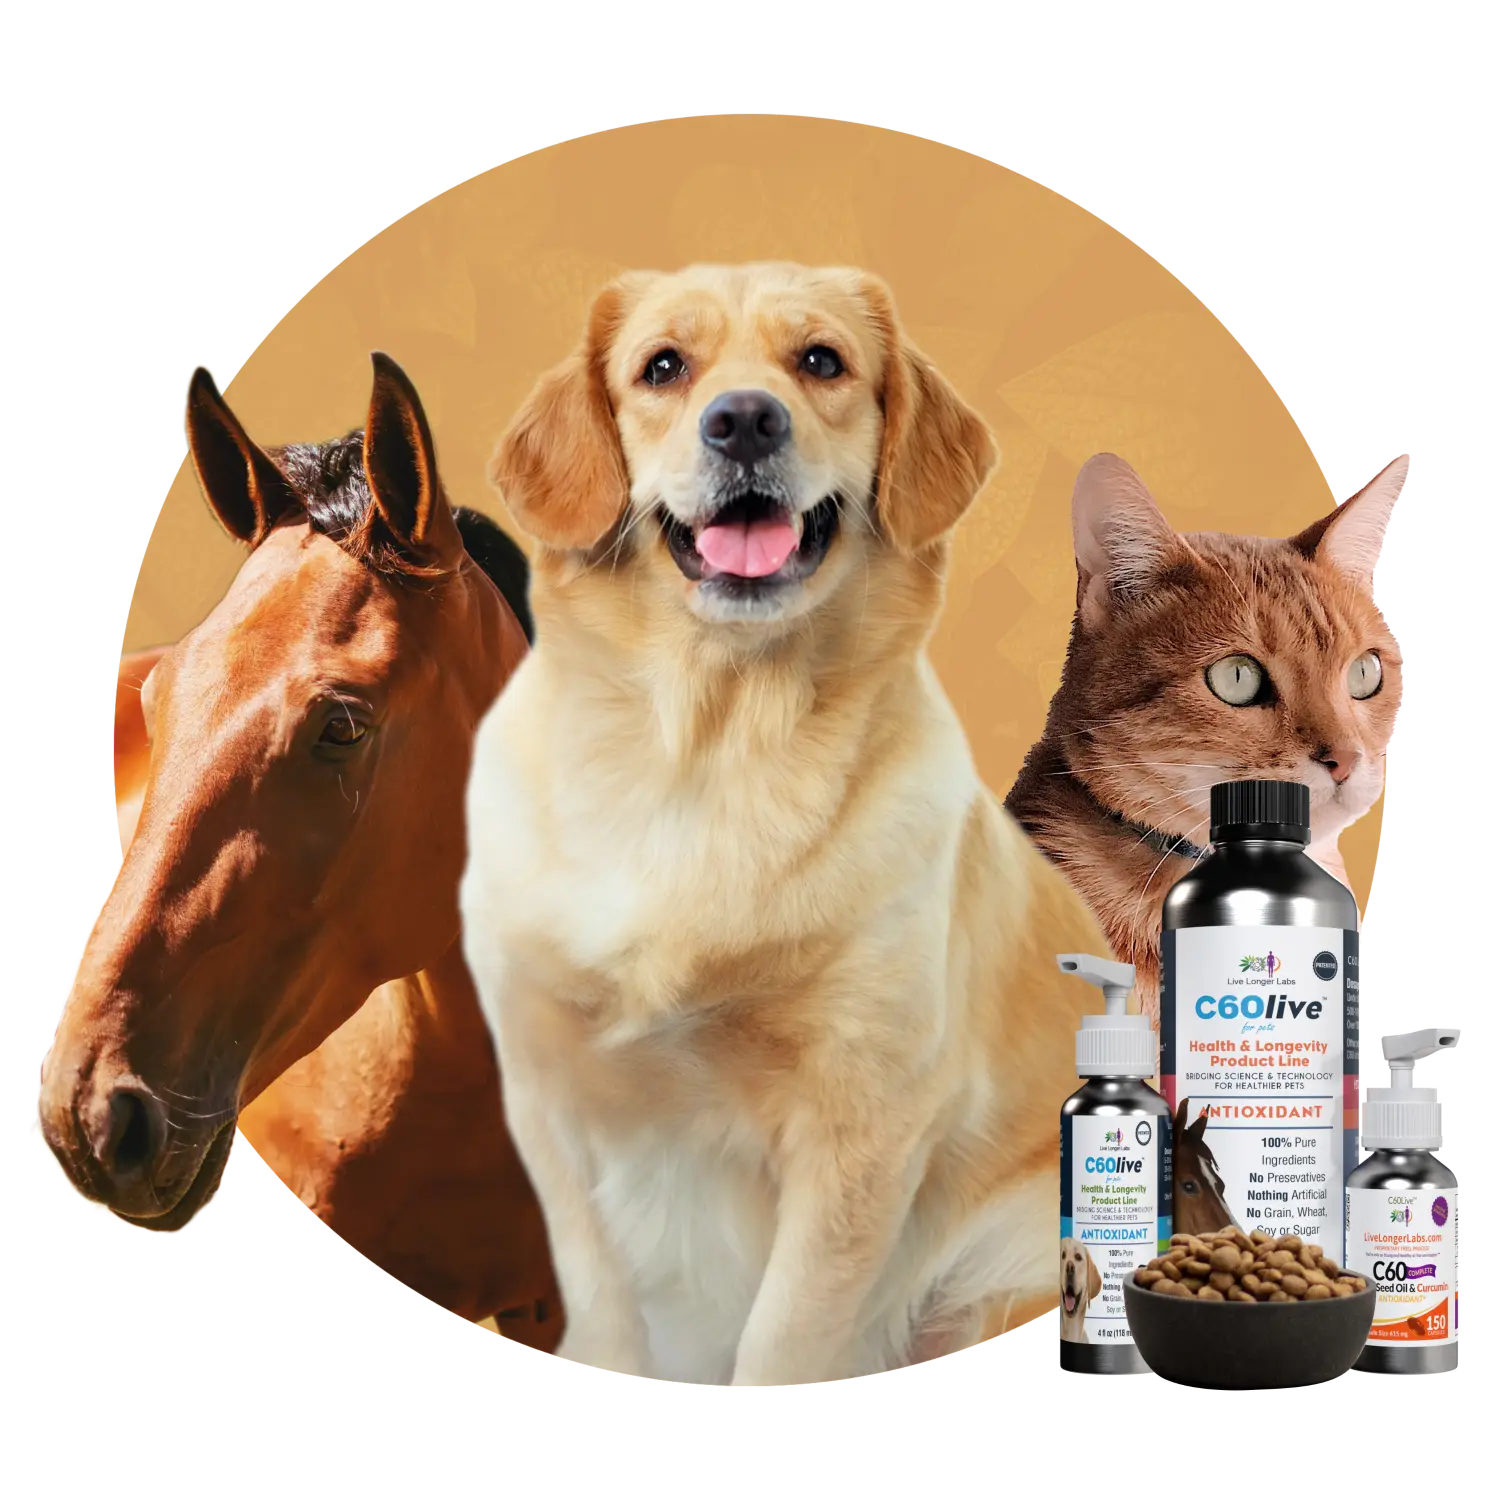 Three pets in a photo from left to right: a horse, dog, and a cat with their corresponding bottles of C60live for pets and a bowl of dog food in front of their image.